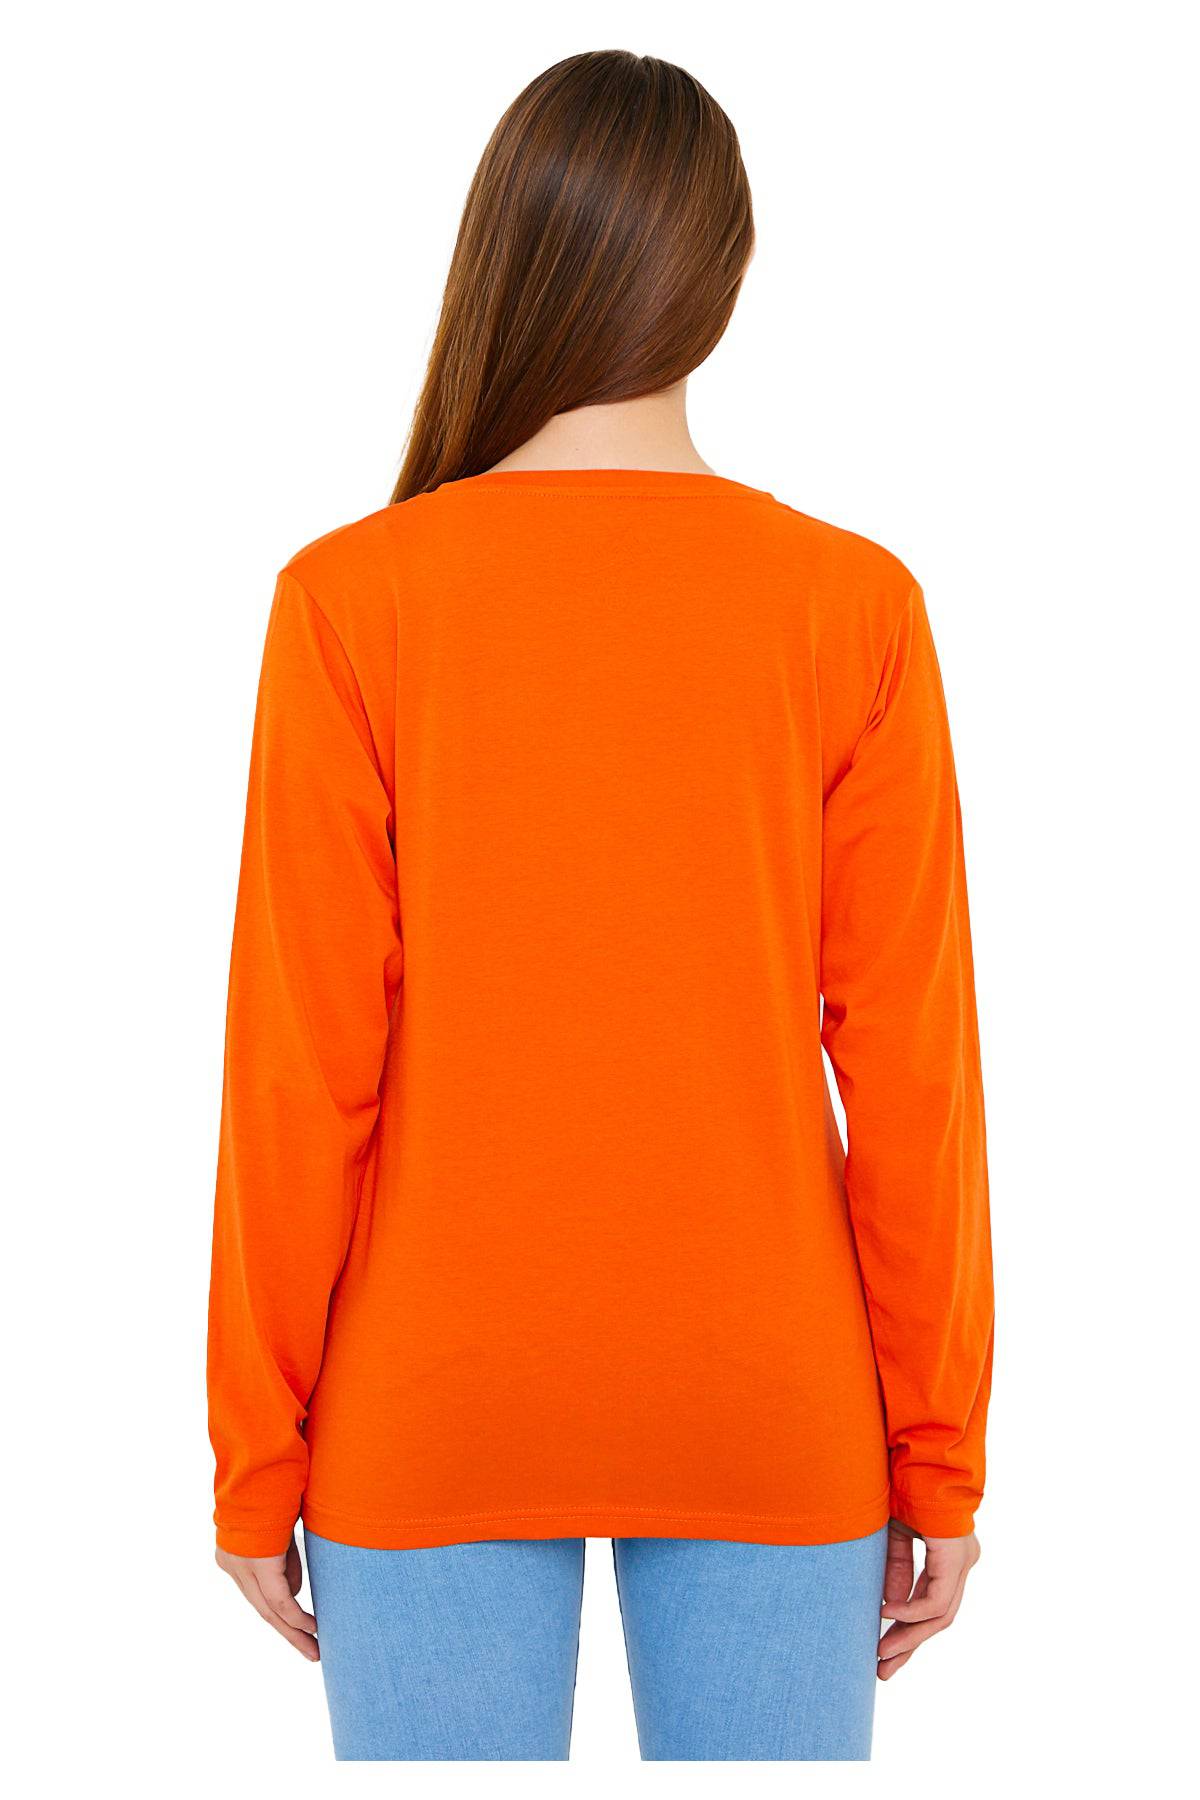 Long Sleeve V Neck T-Shirts for Women & Girls - Colorful Pima Cotton-114